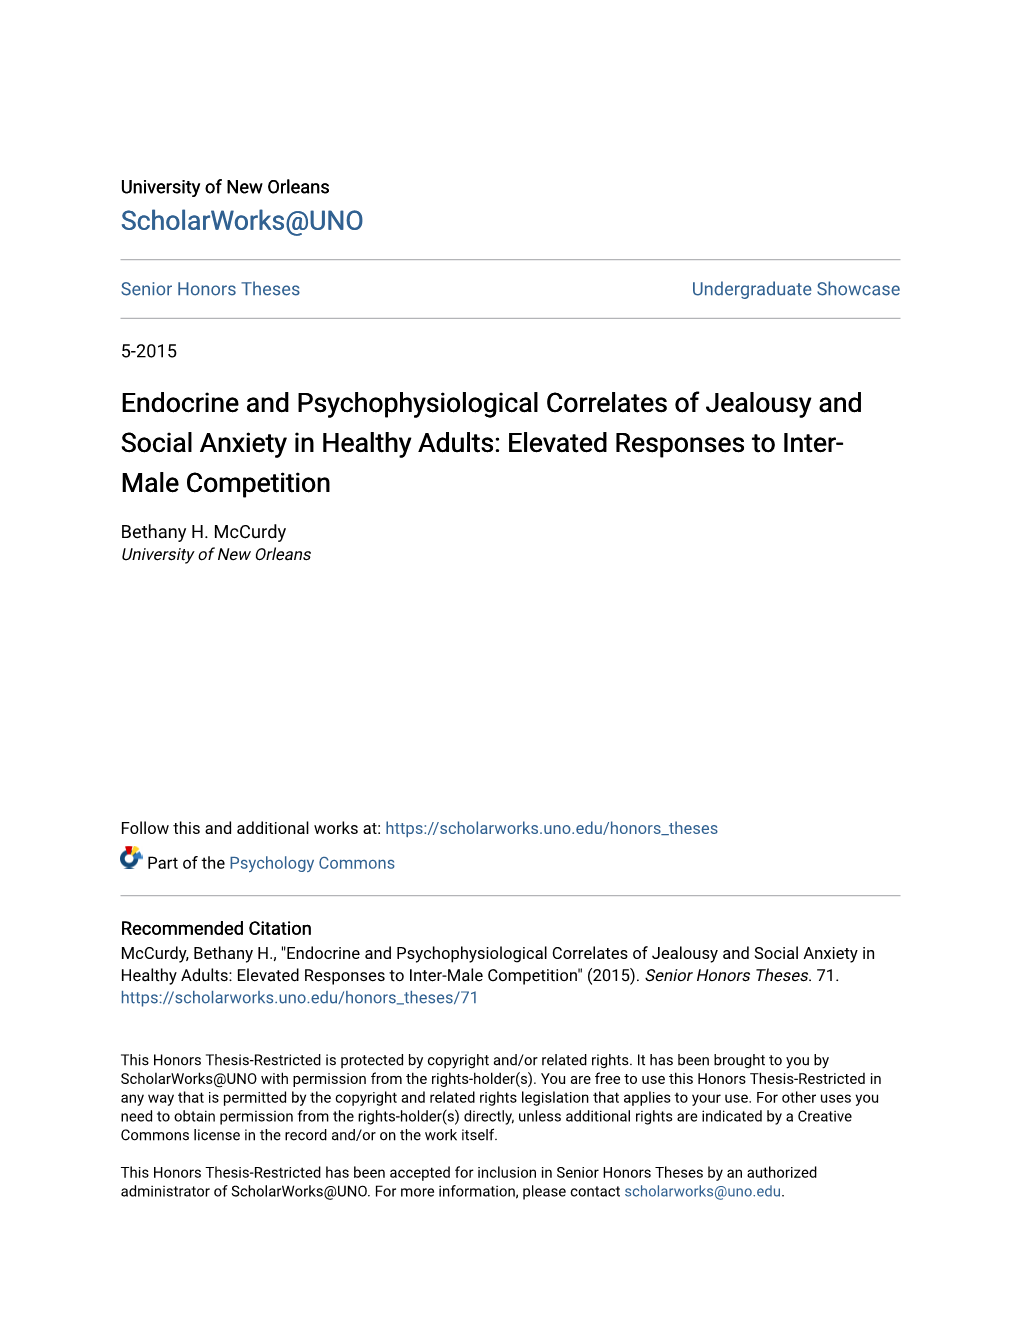 Endocrine and Psychophysiological Correlates of Jealousy and Social Anxiety in Healthy Adults: Elevated Responses to Inter- Male Competition